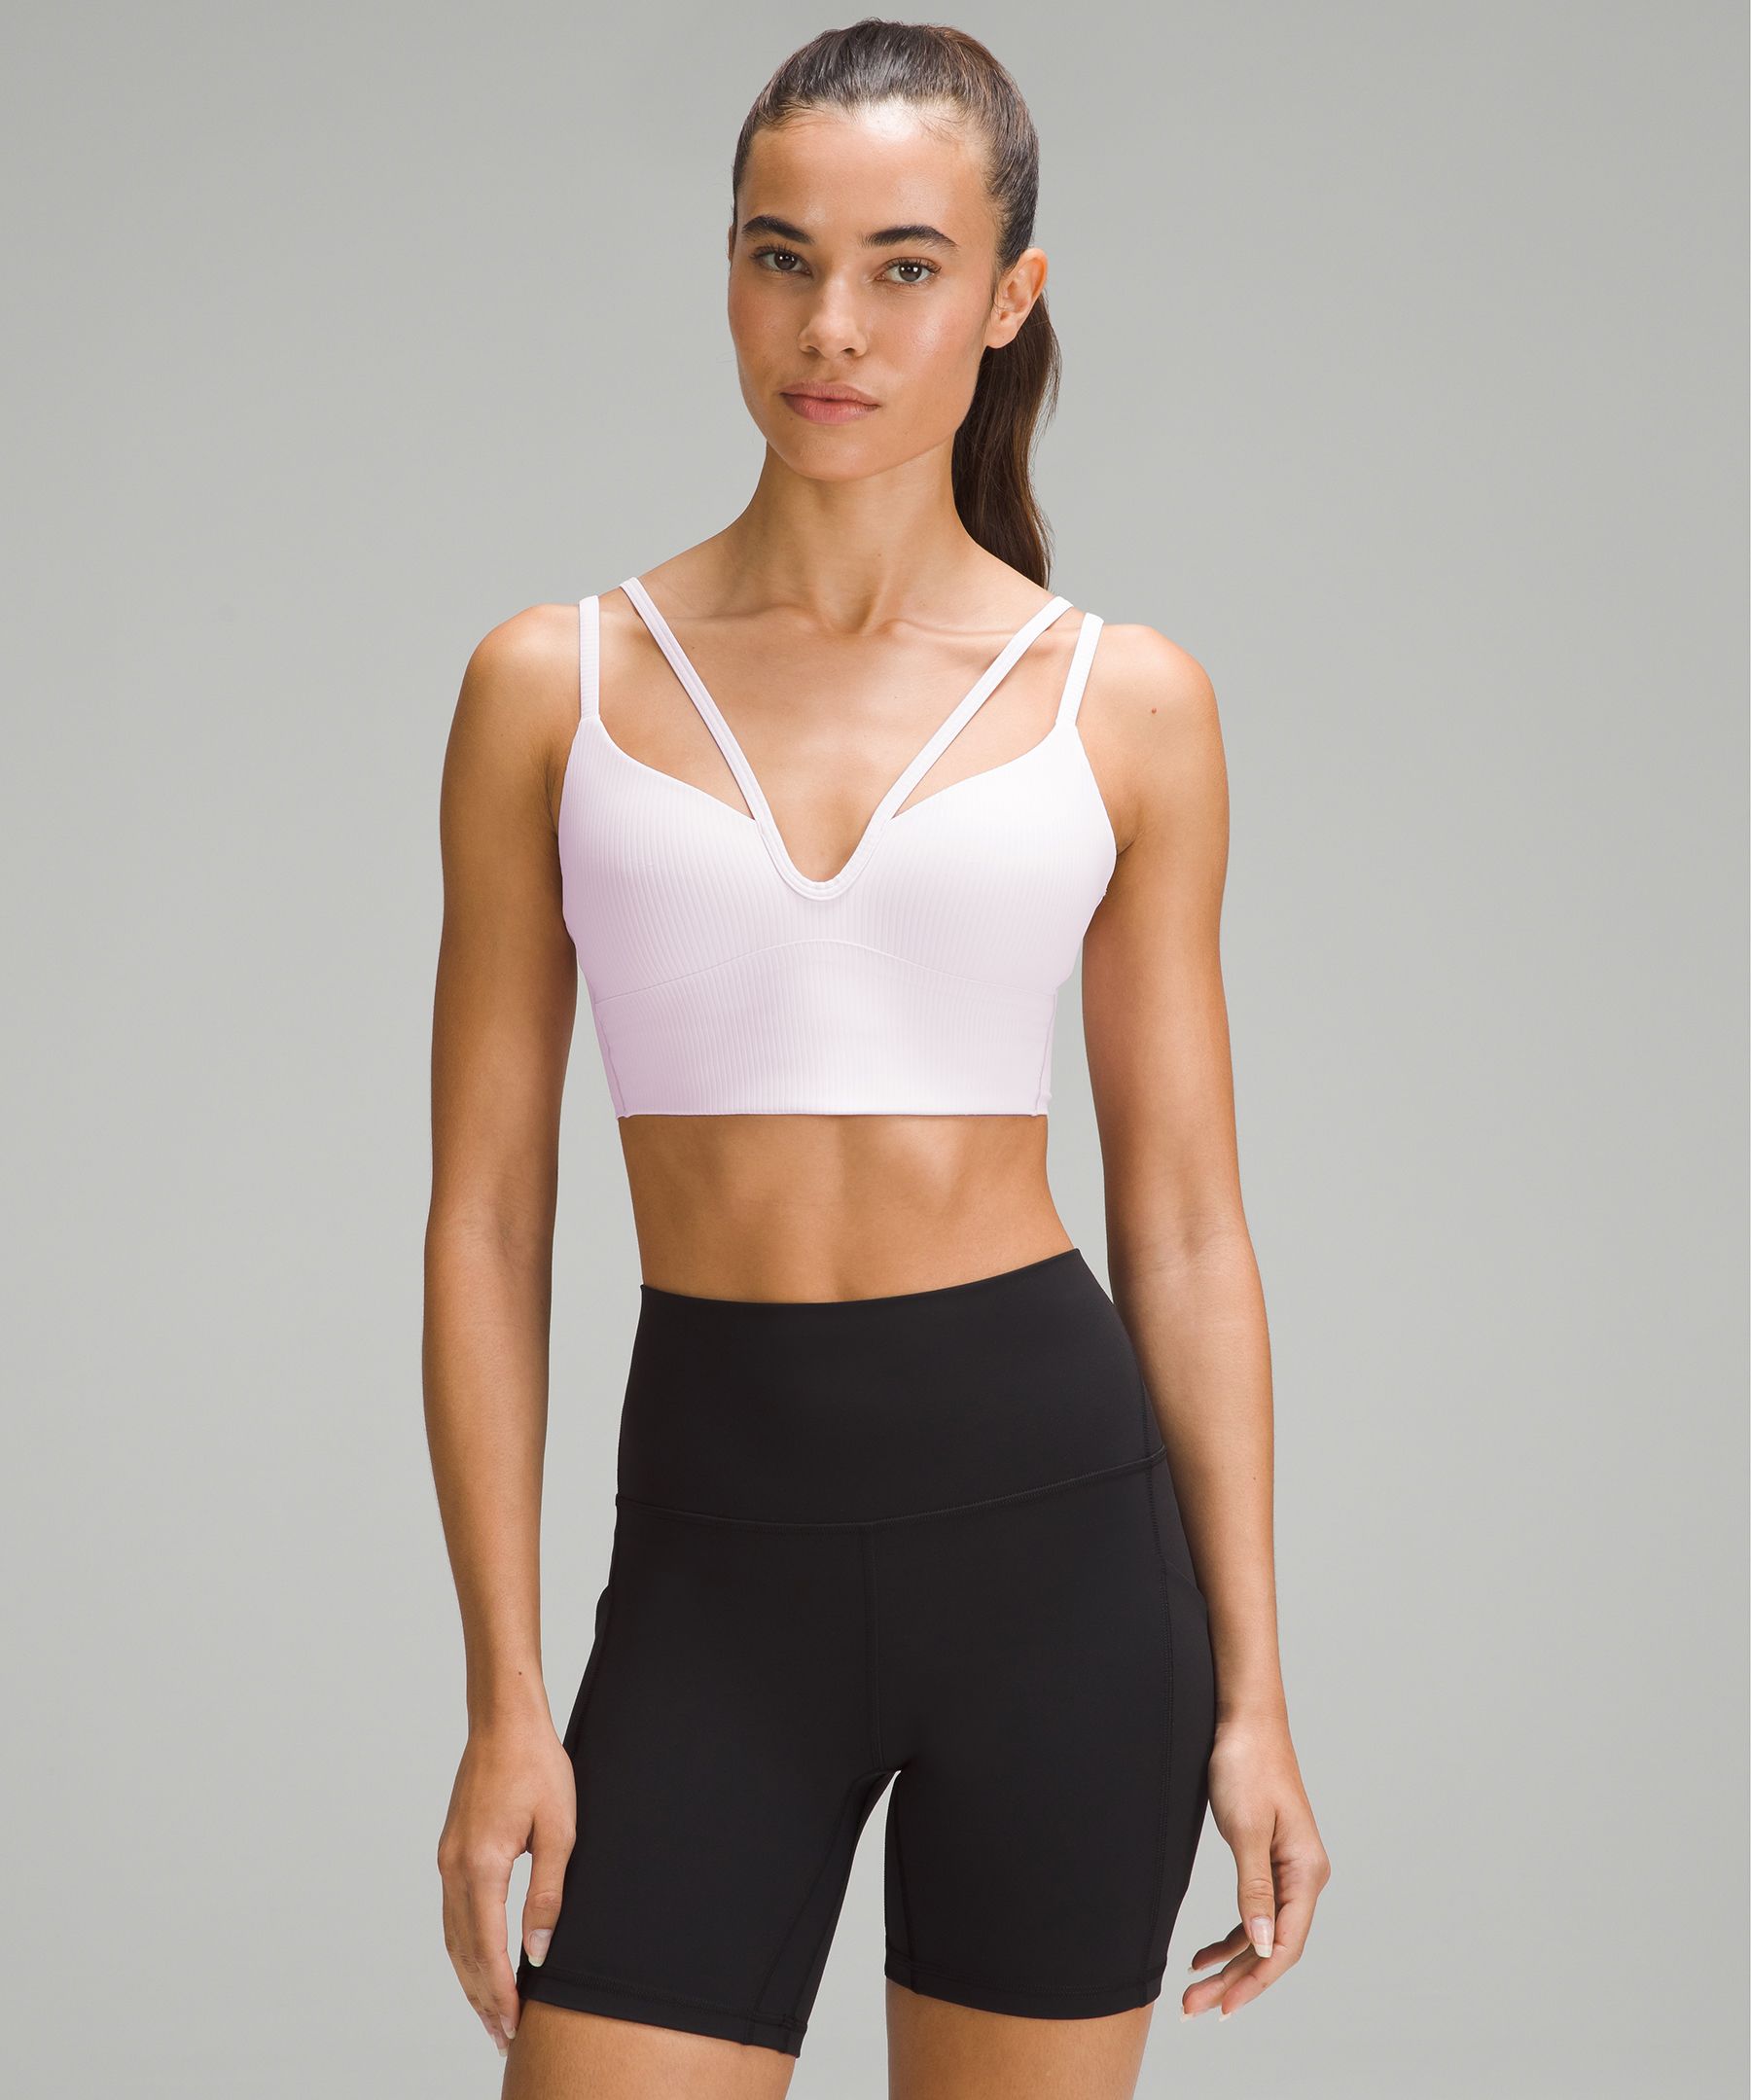 Like a Cloud Strappy Longline Ribbed Bra *Light Support, B/C Cup, Women's  Bras